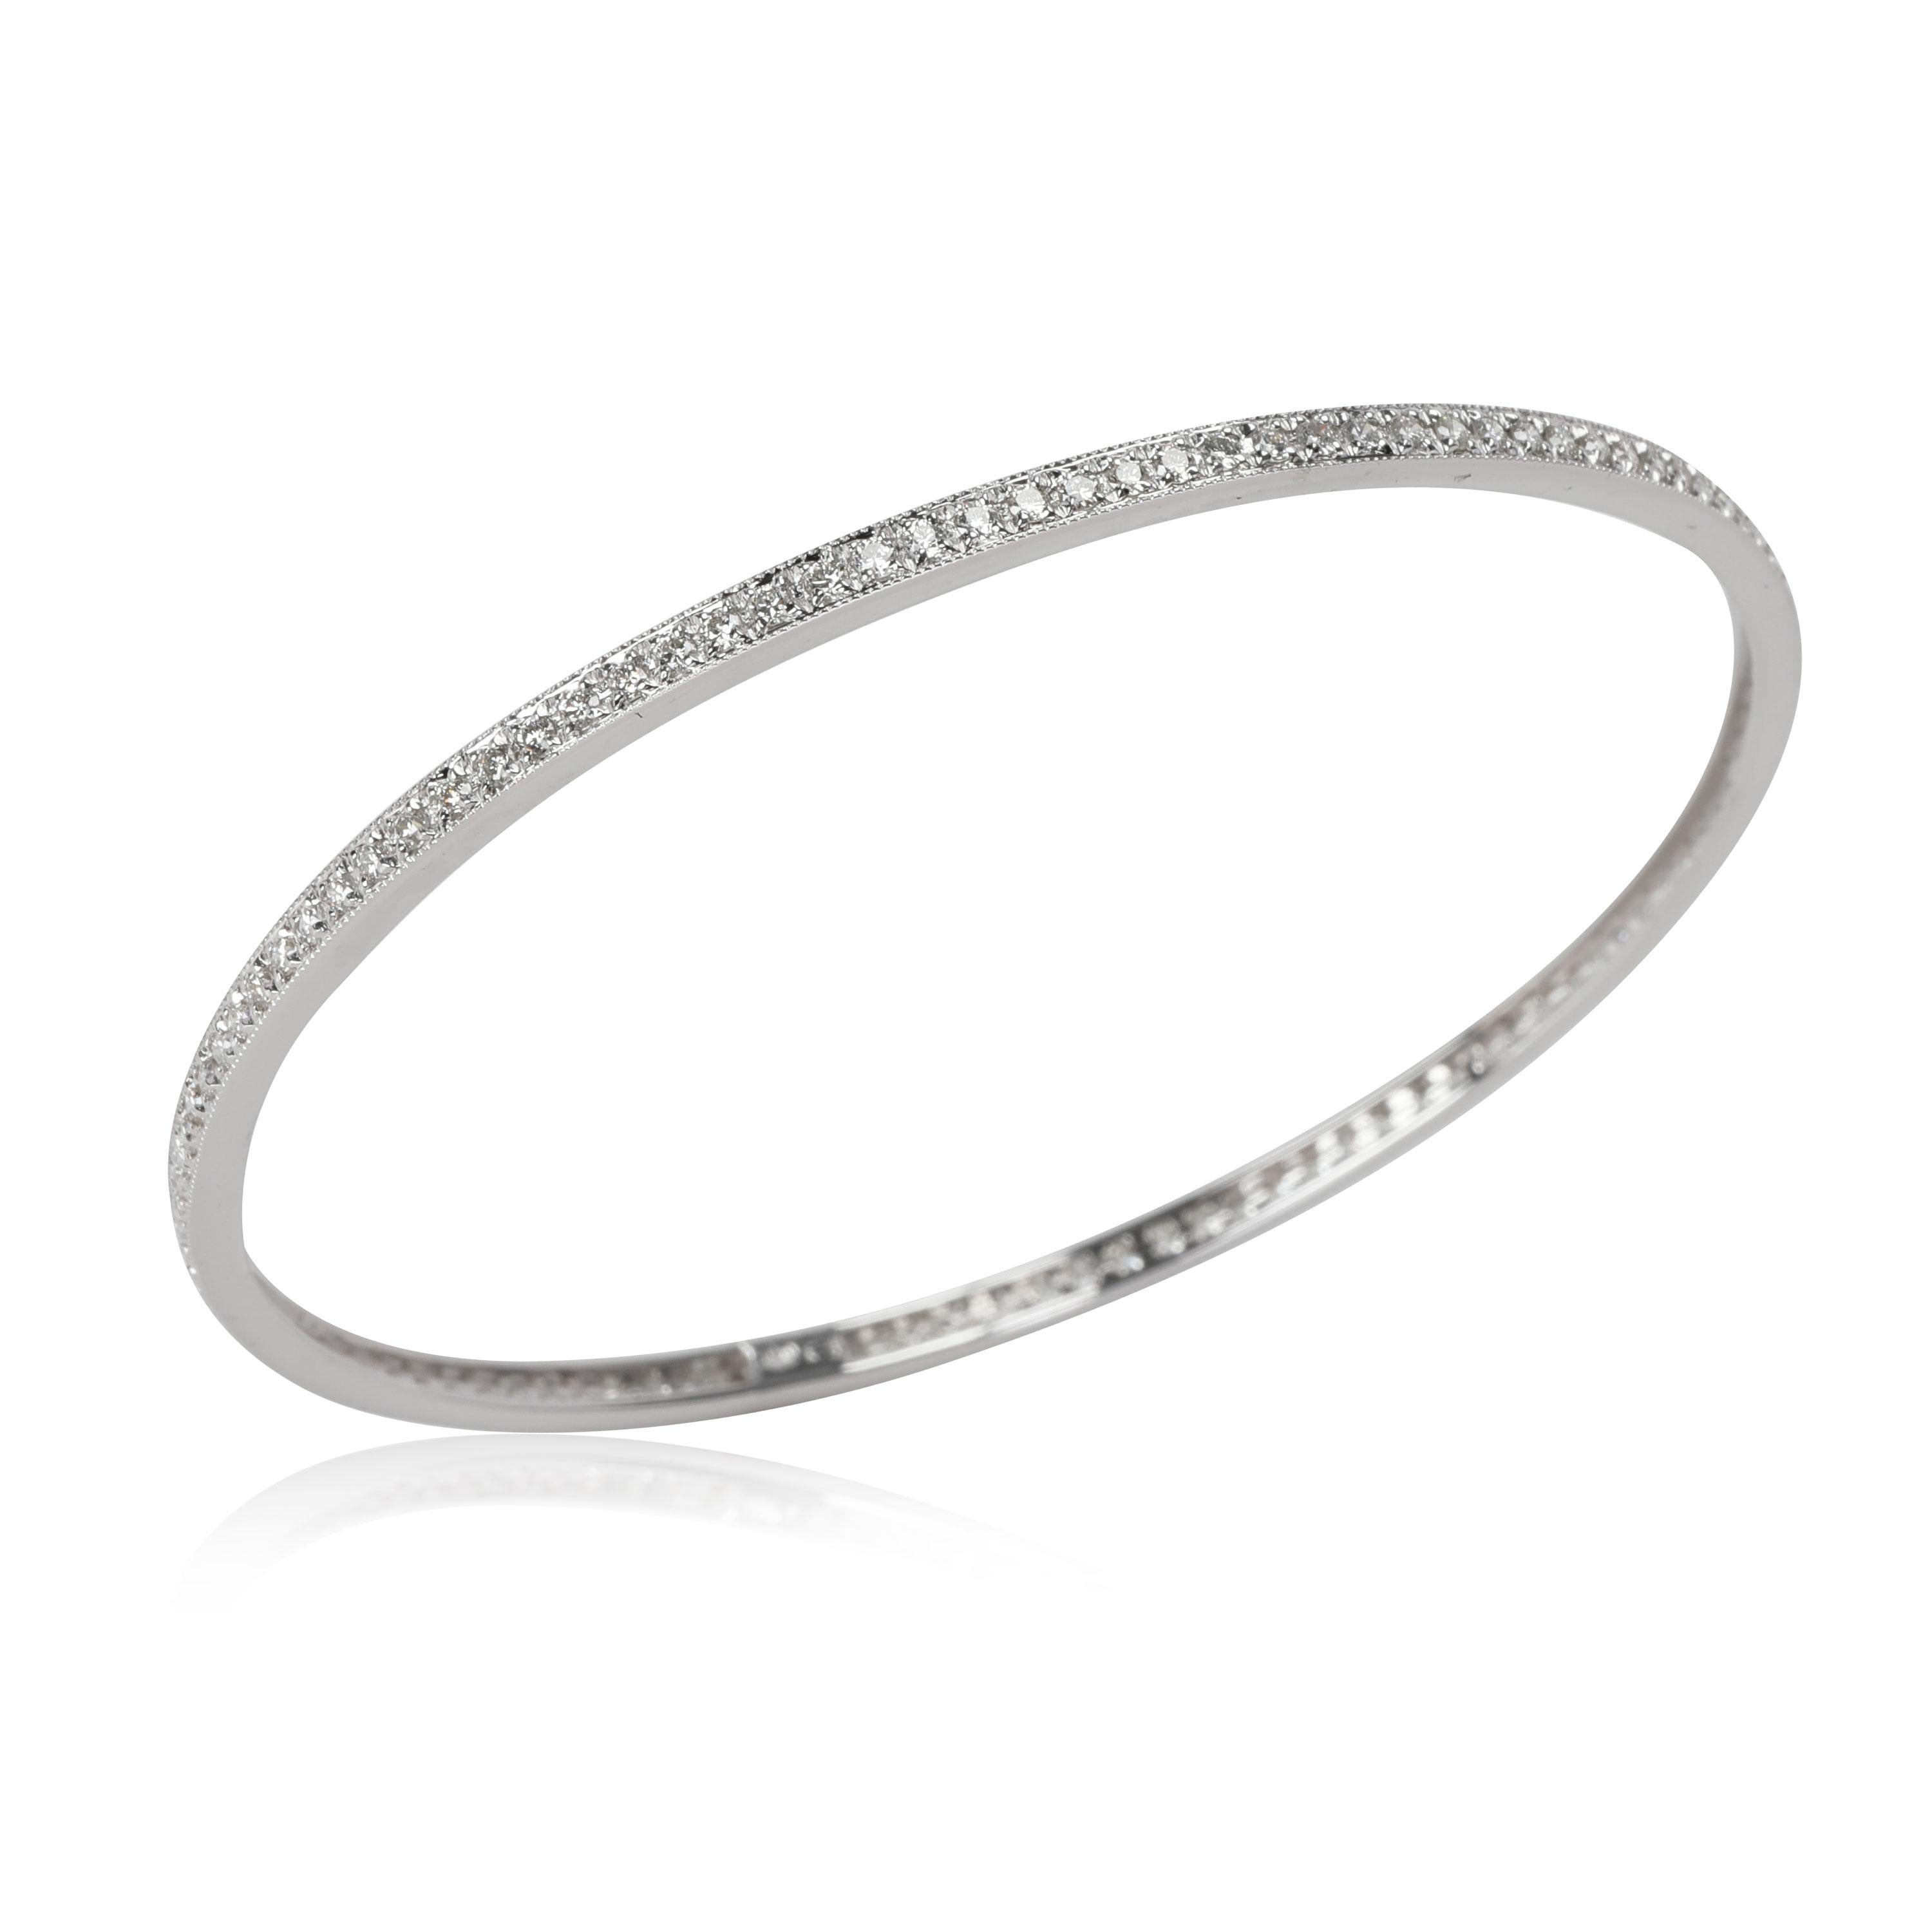 Diamond Slip On Bangle in 18k White Gold 1.75 CTW

PRIMARY DETAILS
SKU: 117277
Listing Title: Diamond Slip On Bangle in 18k White Gold 1.75 CTW
Condition Description: Retails for 2995 USD. In excellent condition and recently polished. Fits a 7.5